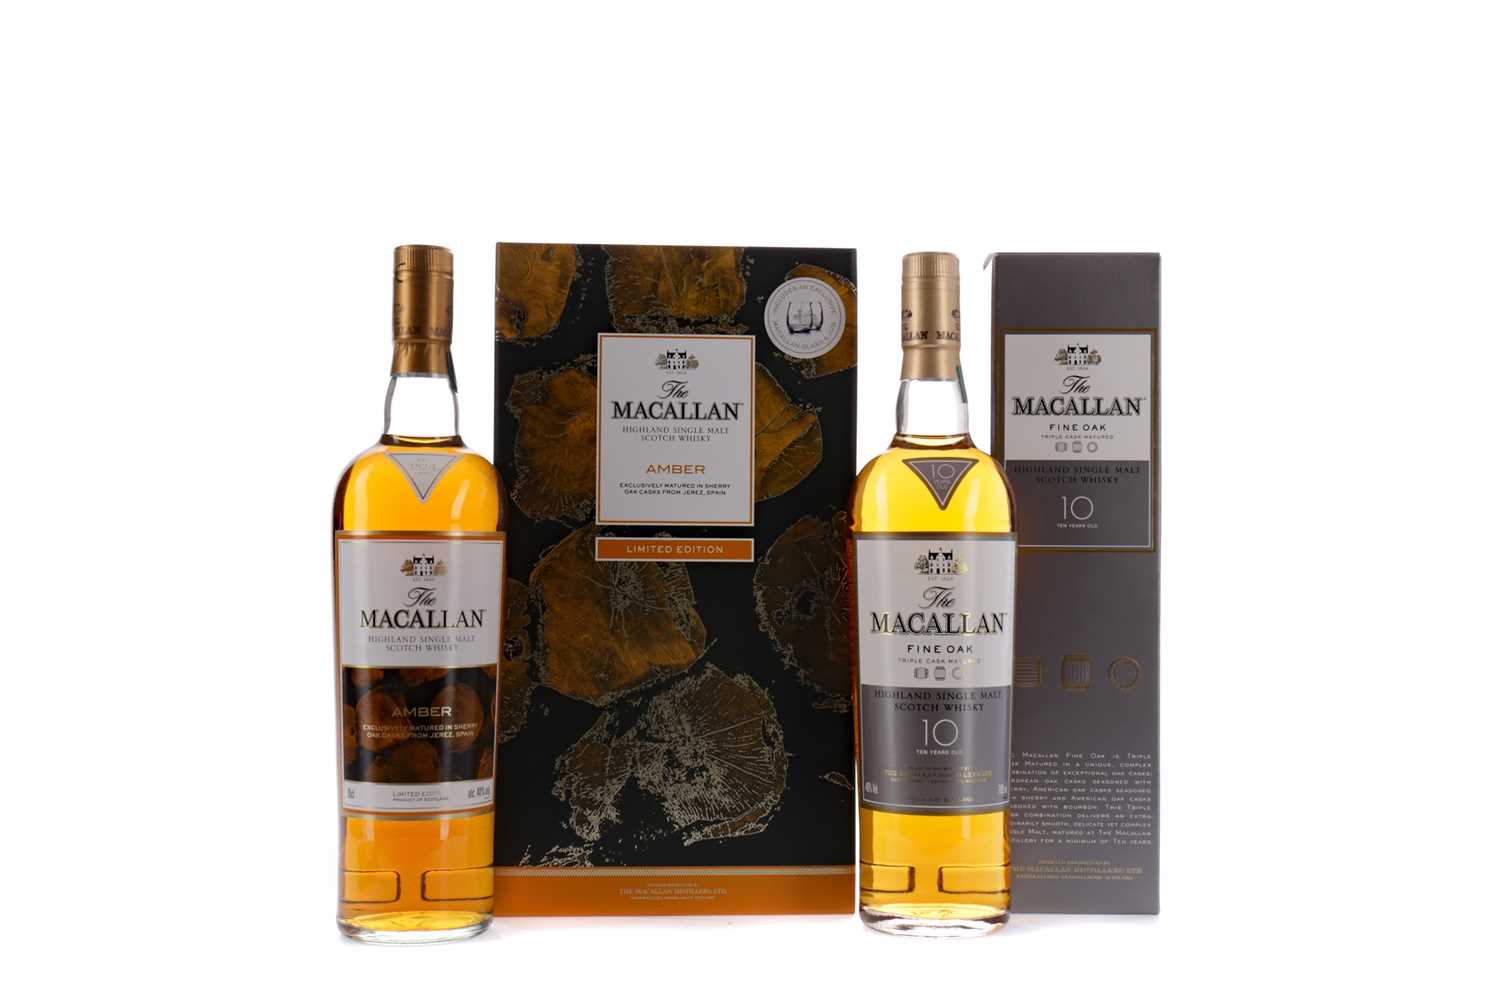 Lot 110 - MACALLAN  AMBER SPECIAL EDITION JUG AND GLASS SET, AND MACALLAN FINE OAK AGED 10 YEARS